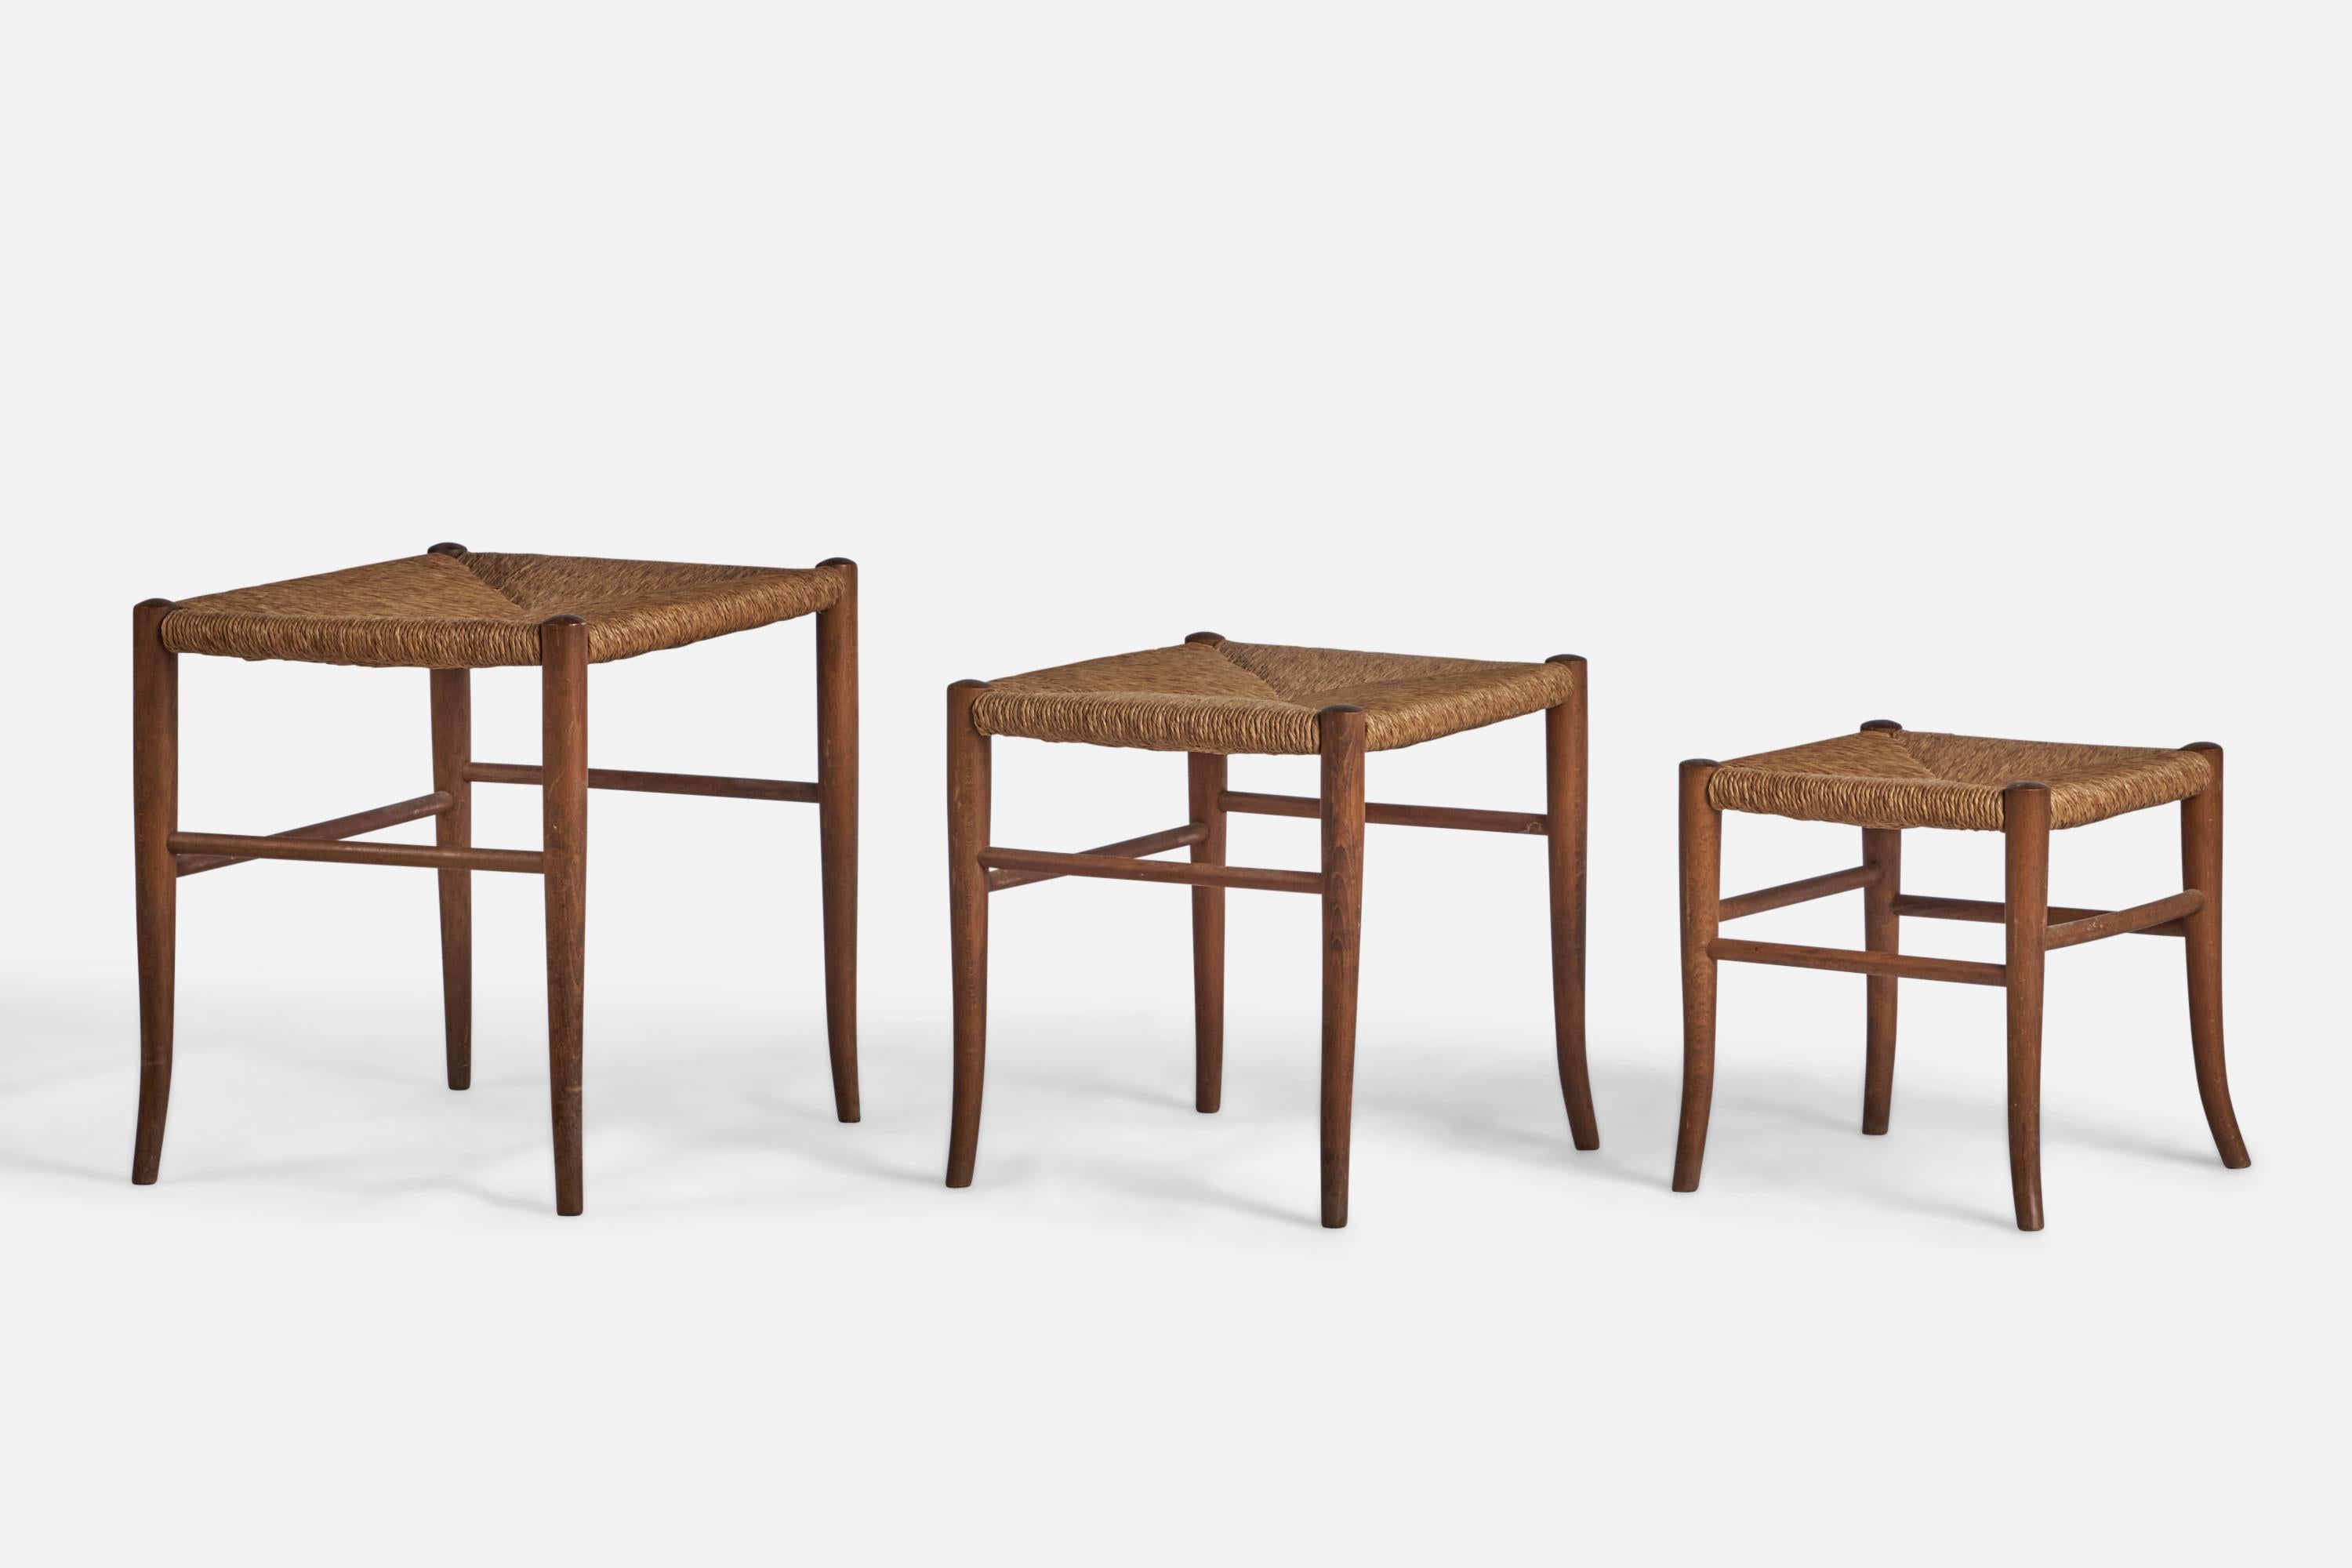 Italian Designer, Three Nesting Stools, Oak, Rush, Italy, 1940s In Good Condition For Sale In High Point, NC